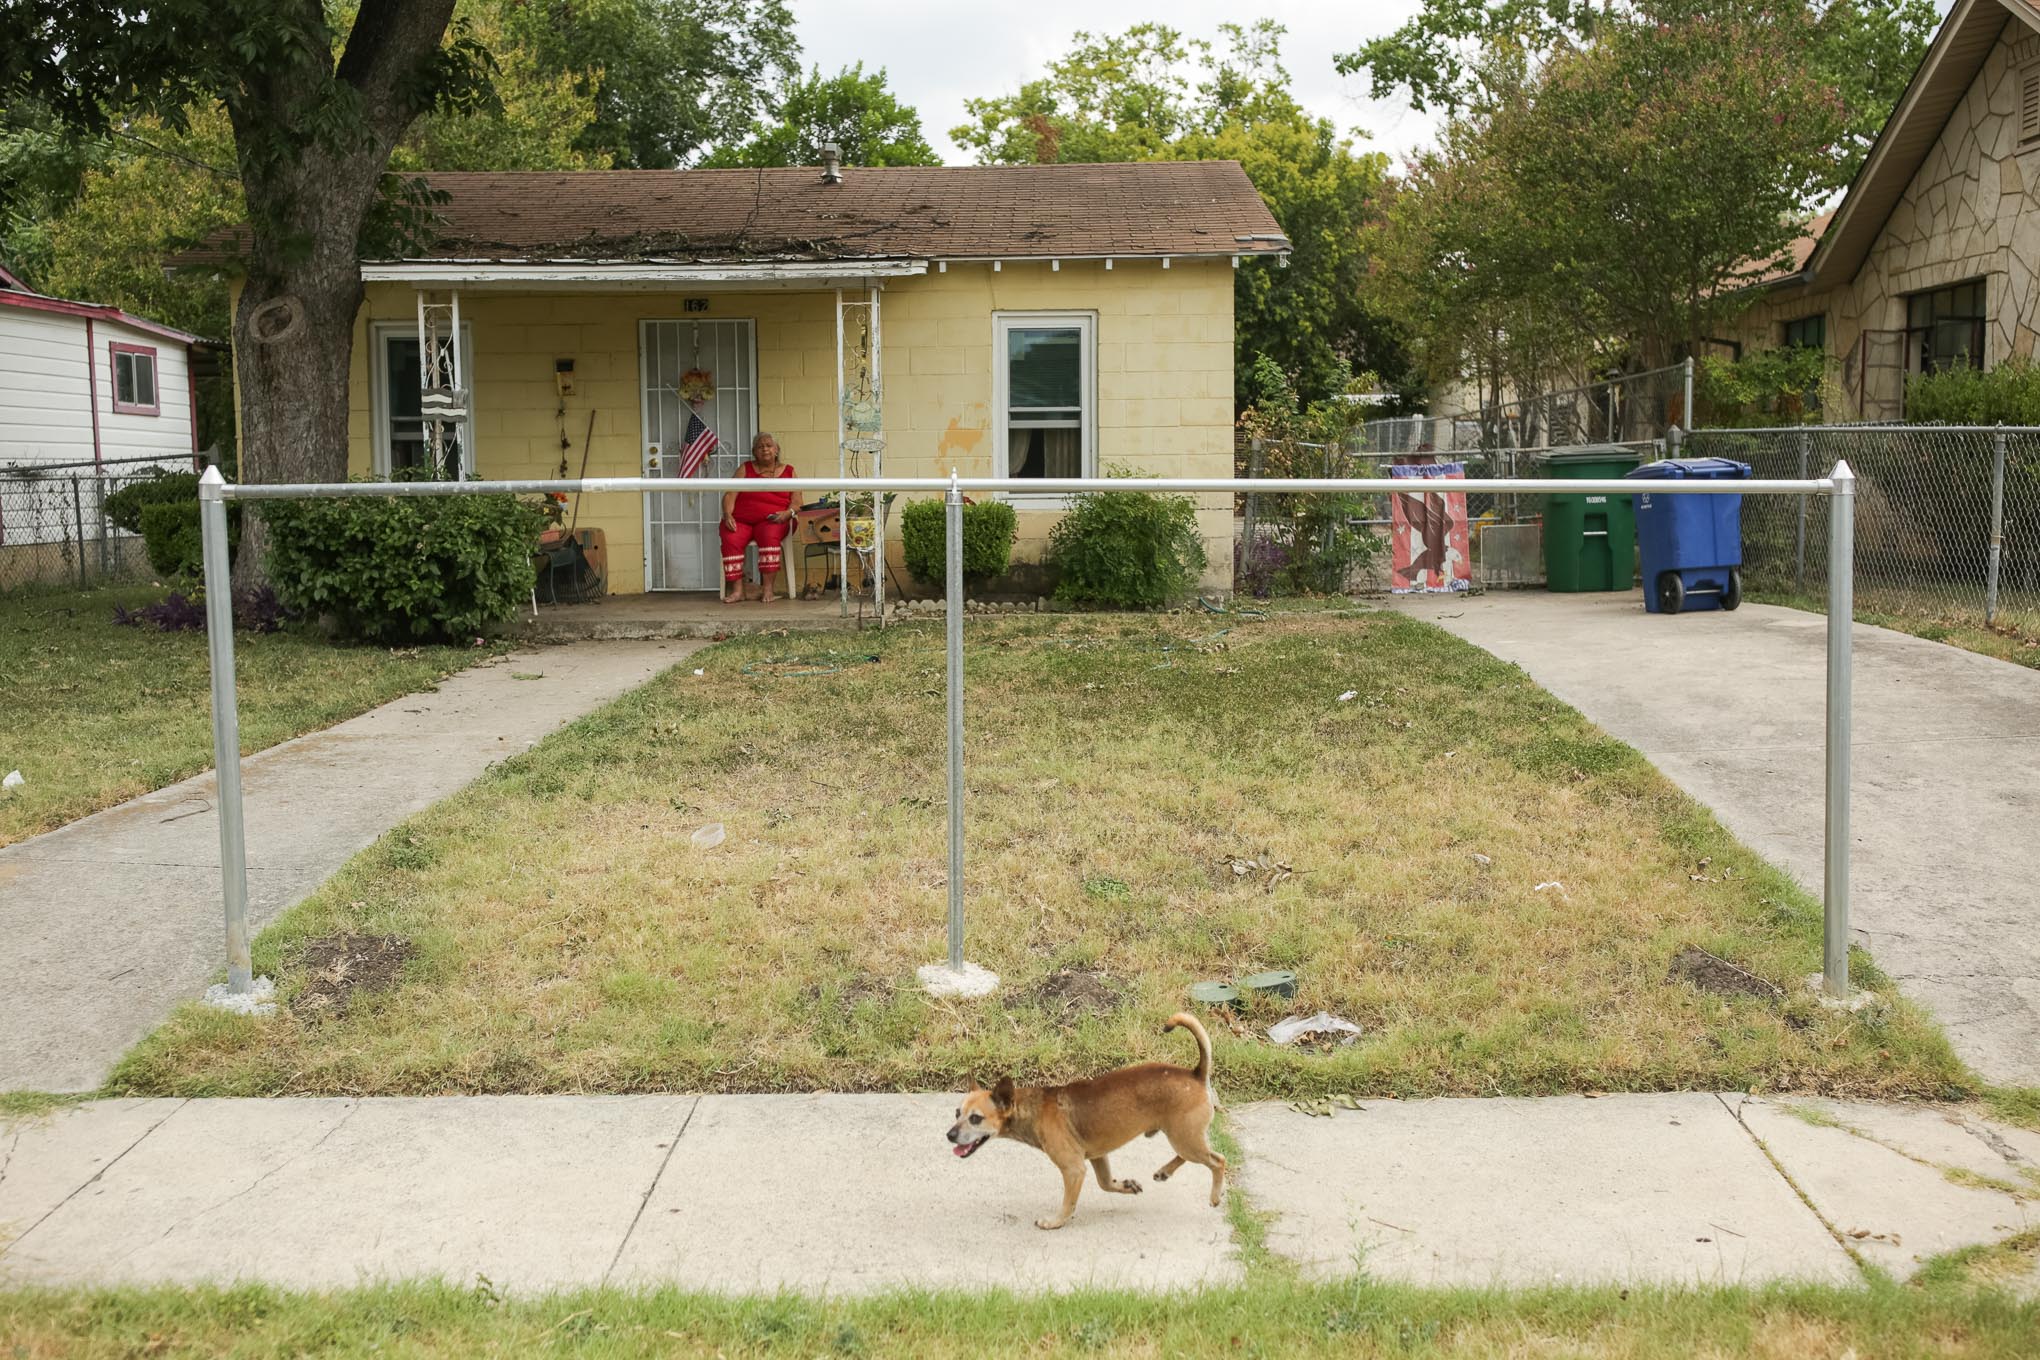 A dog named Romeo walks in front of a house that is violating the current animal care services ordinance which requires dogs to be contained to a home and property.